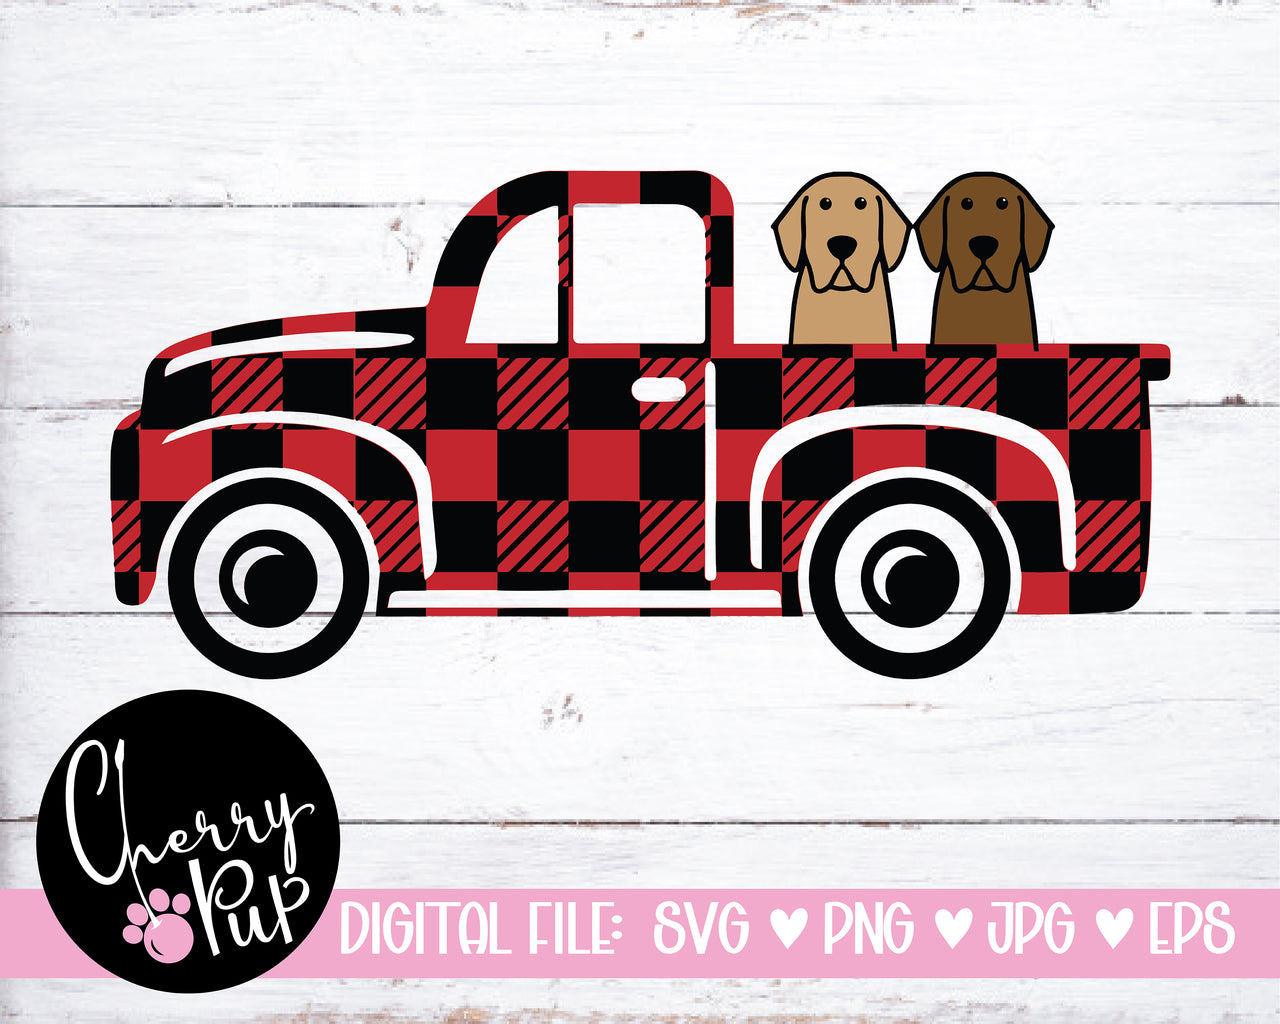 Vintage Buffalo Plaid Truck With Dogs SVG